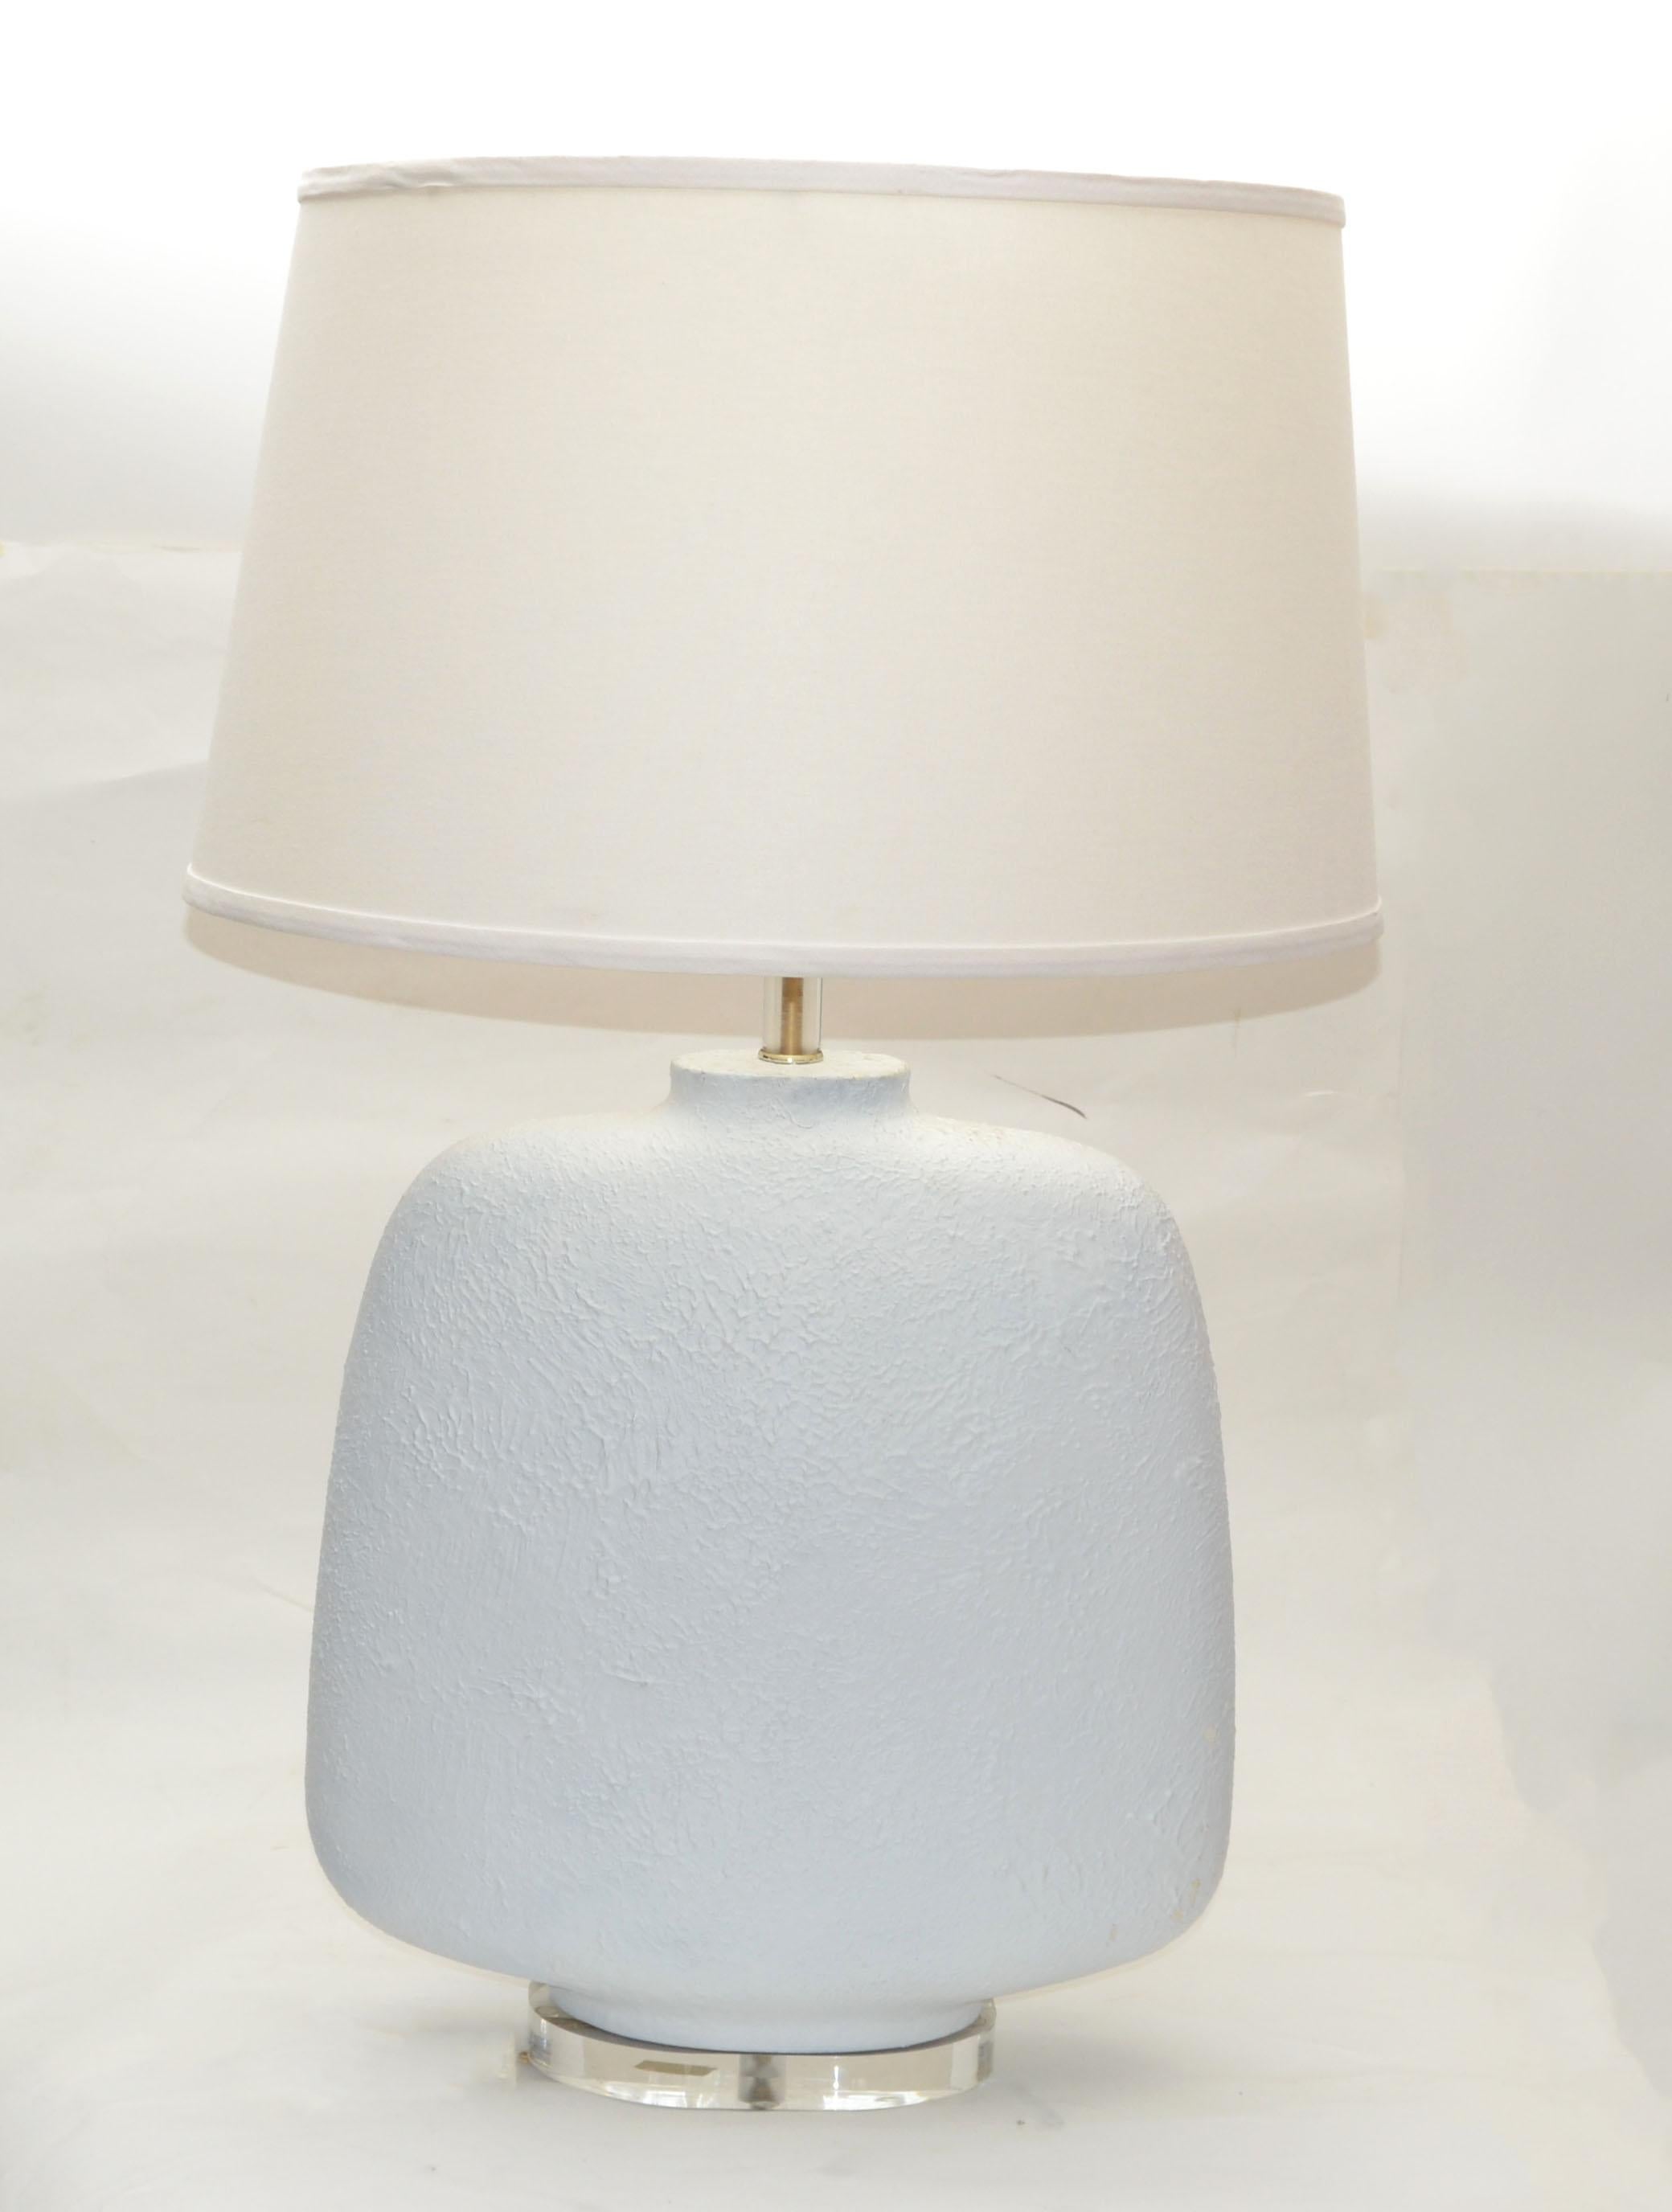 Mid-Century Modern Iconic Sculptural Textured White Plaster Table Lamp on Lucite For Sale 1